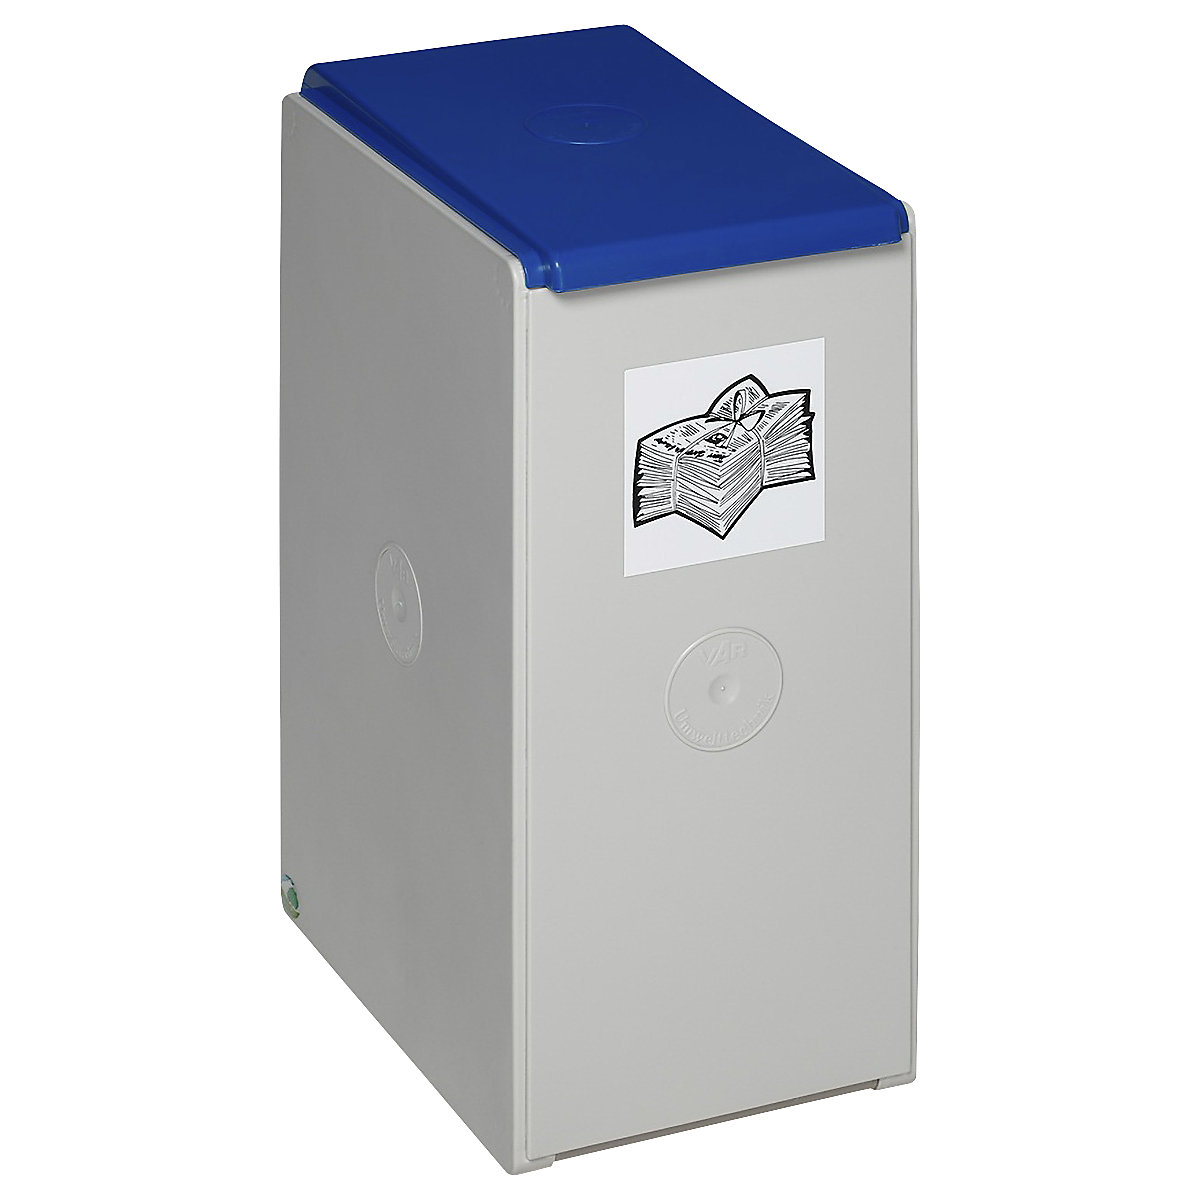 Recyclable waste collector made of plastic – VAR